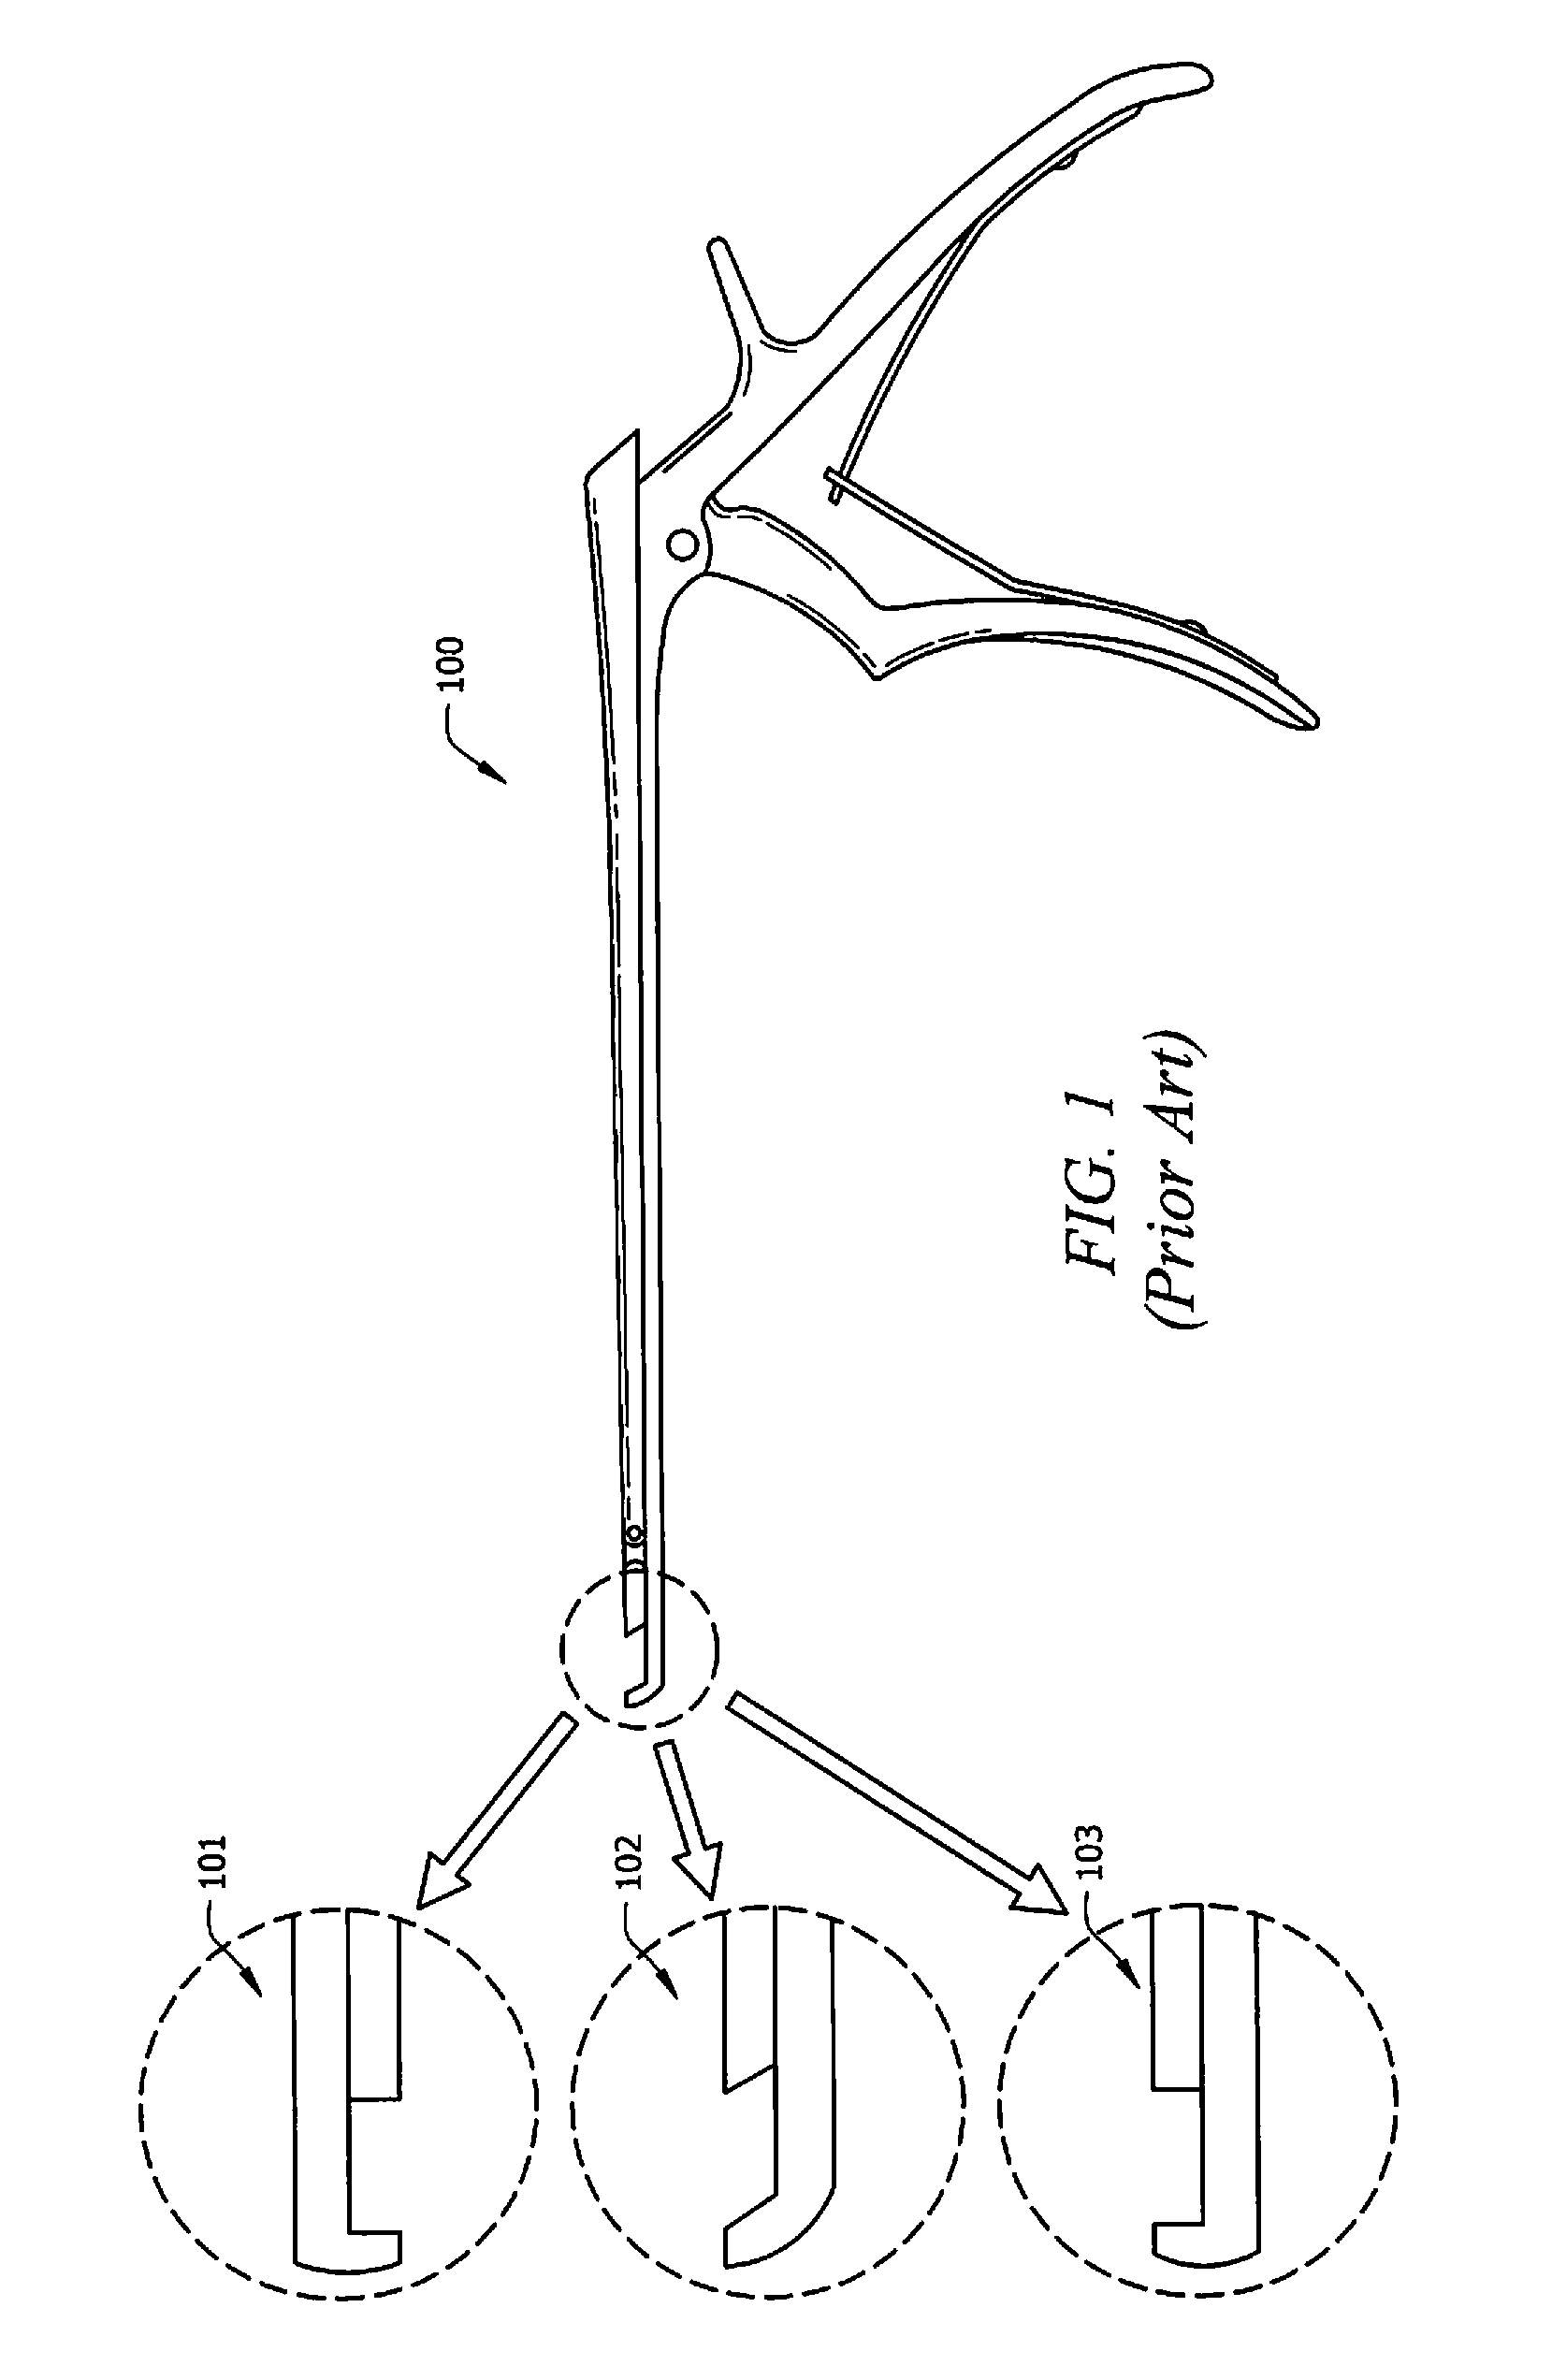 Methods and Devices for Implementing an Improved Rongeur